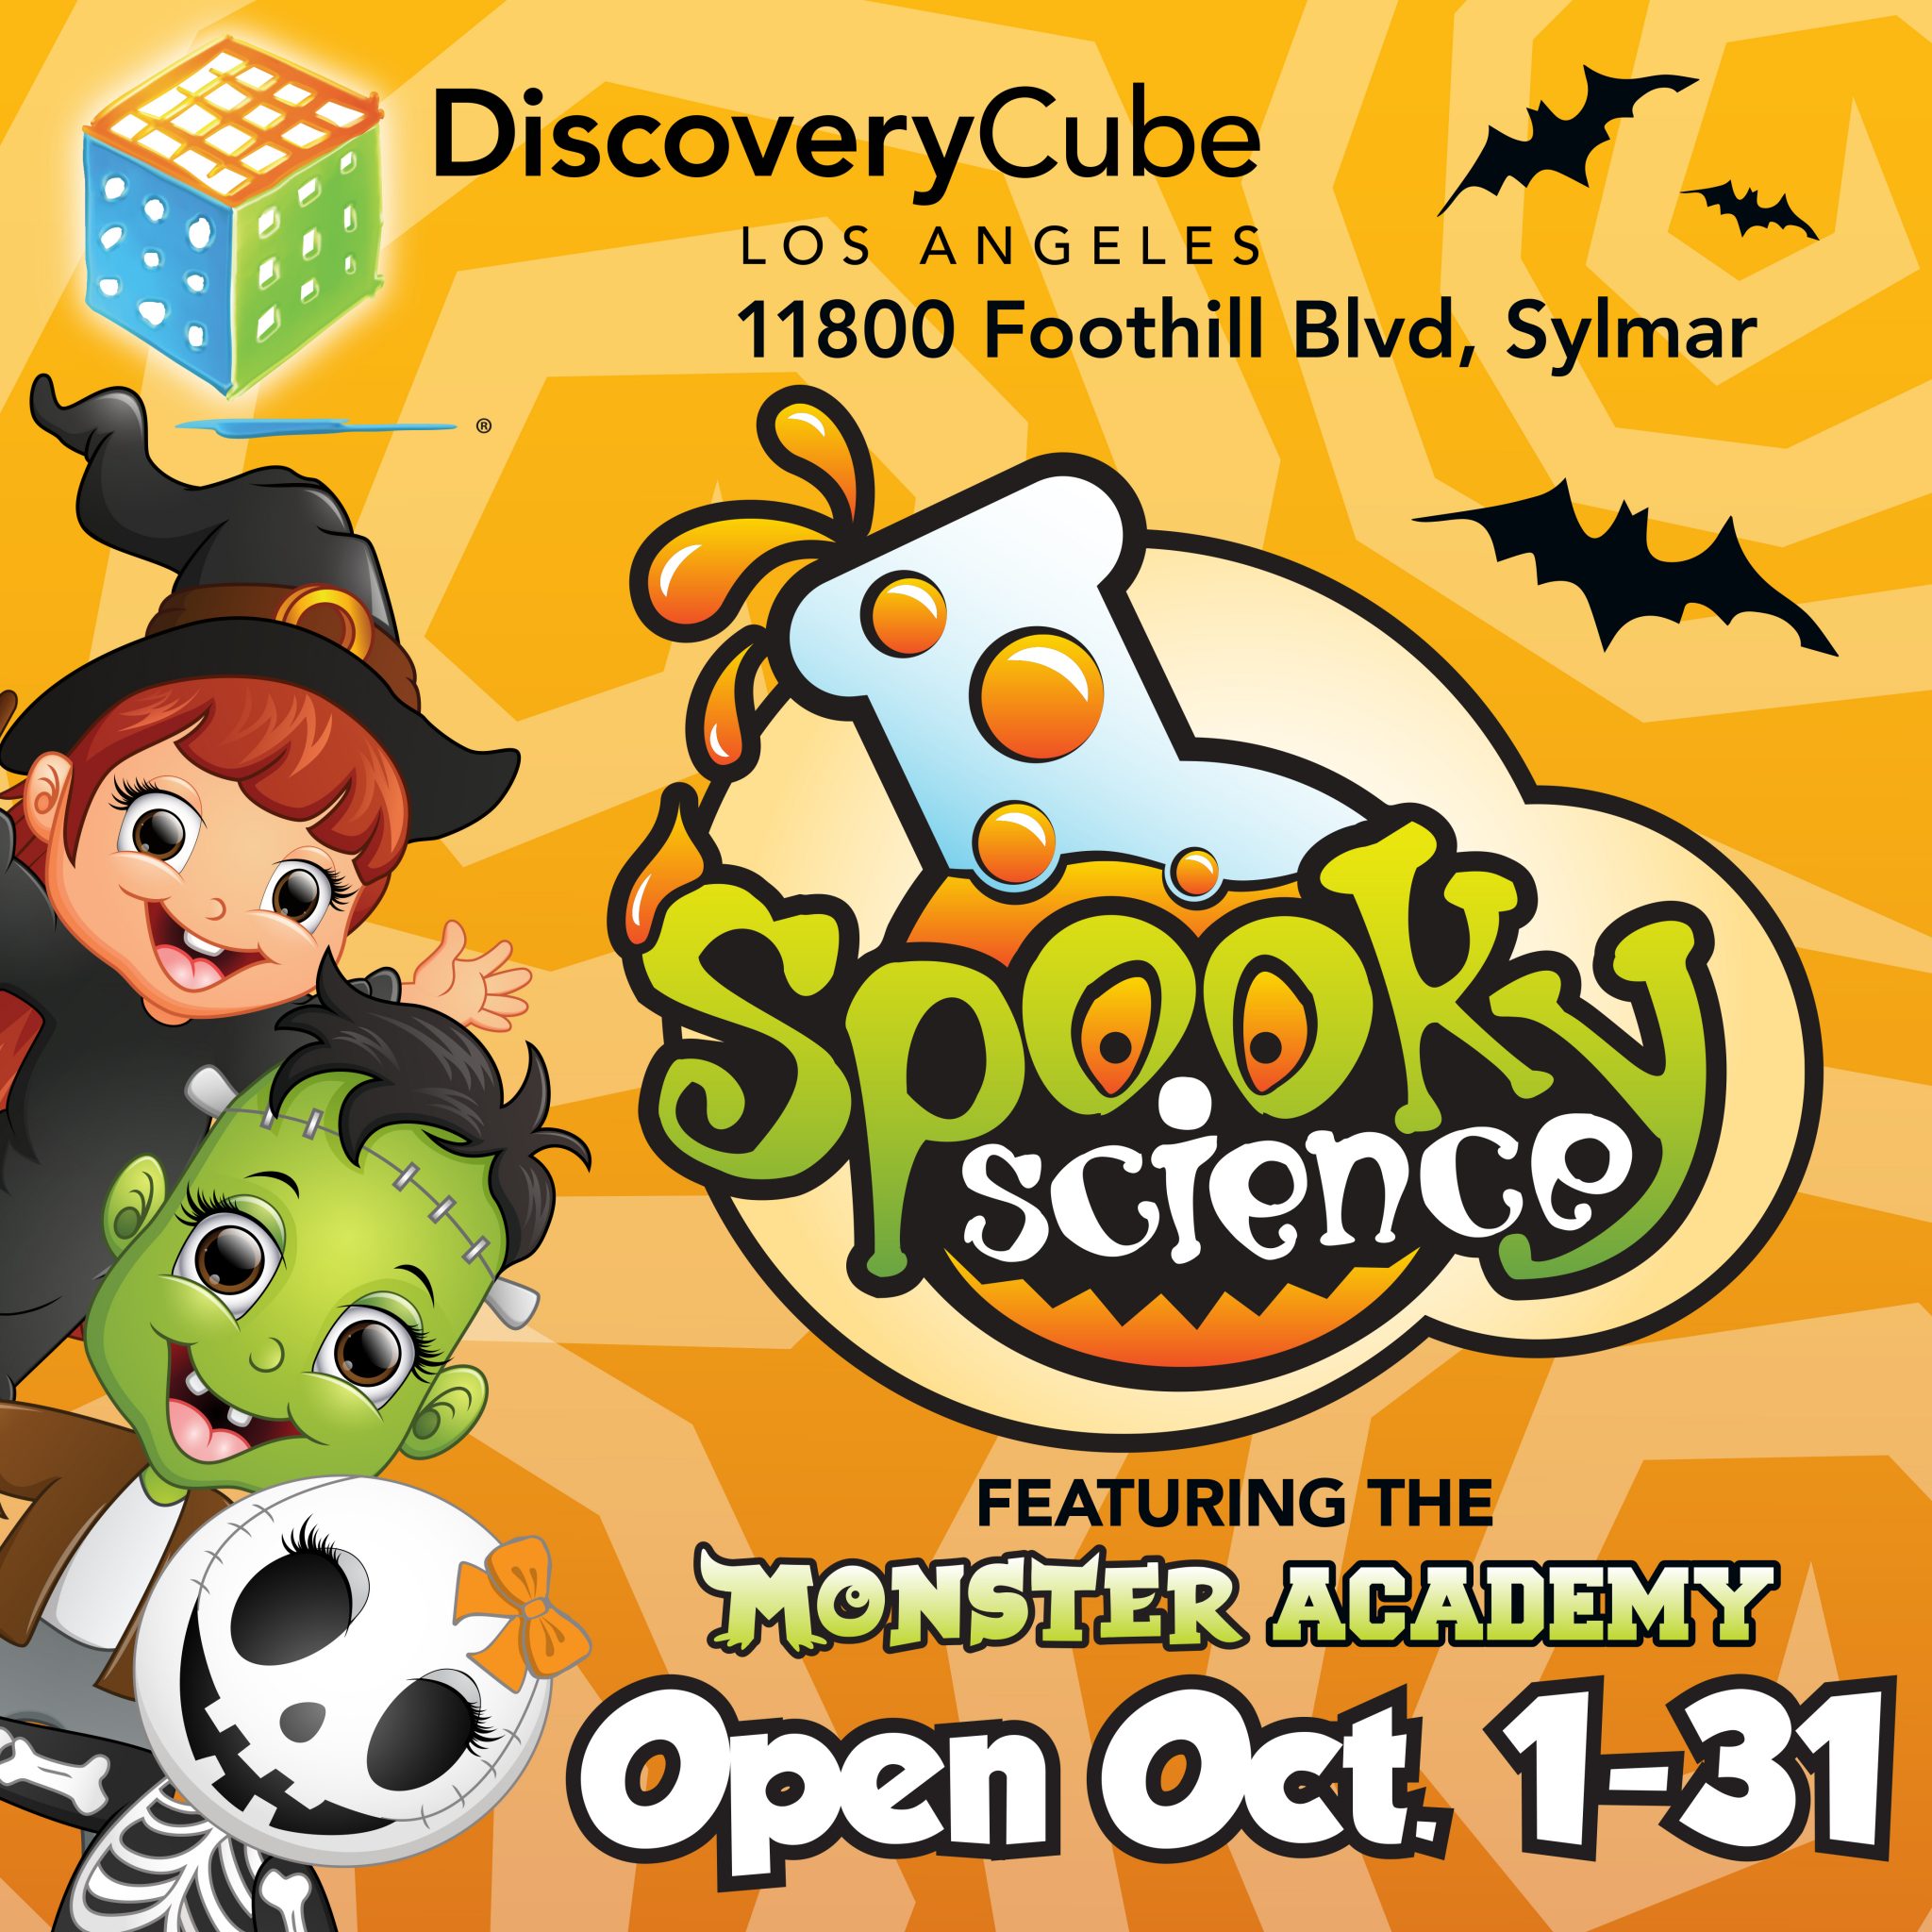 Spooky Science Featuring the Monster Academy